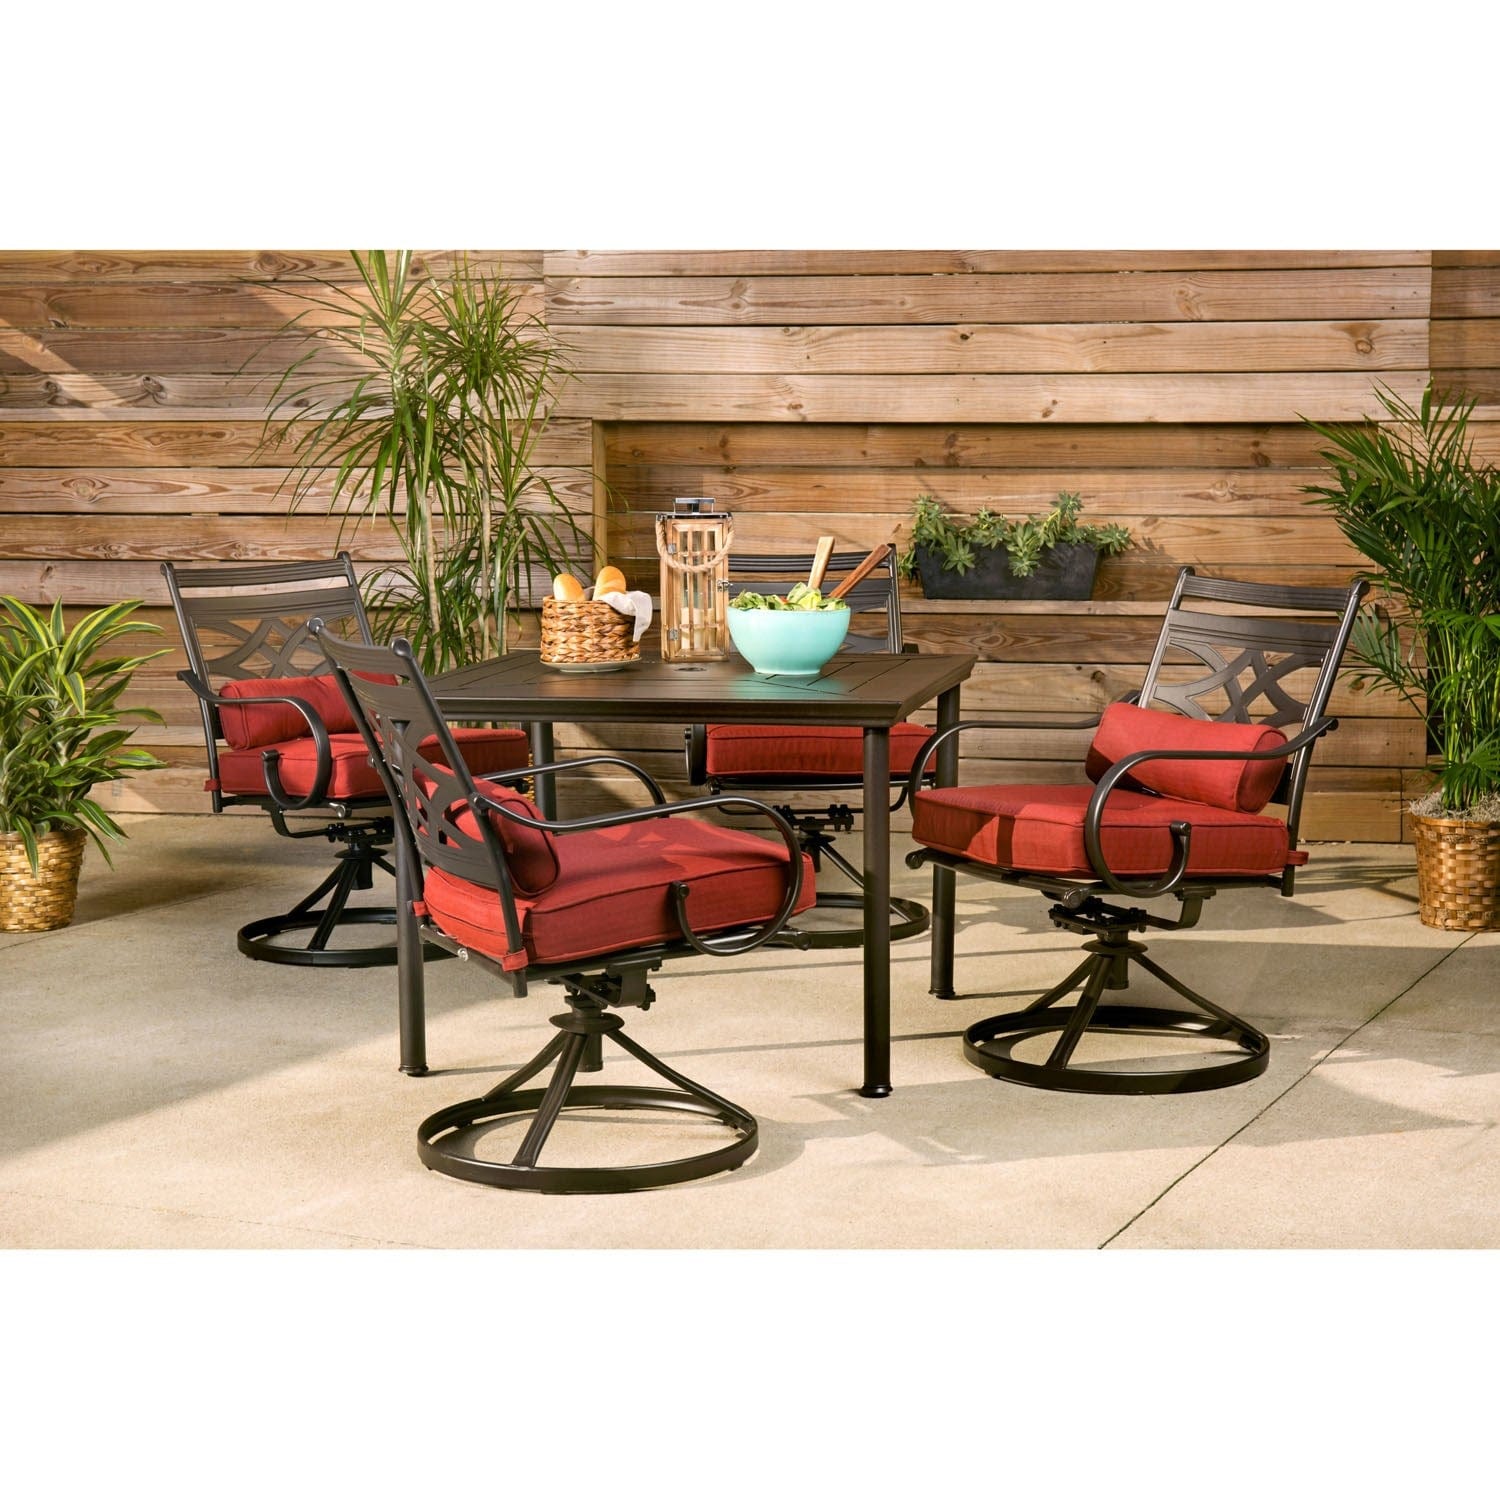 Hanover Outdoor Dining Set Hanover Montclair 5-Piece Patio Dining Set in Chili Red with 4 Swivel Rockers and a 40-Inch Square Table | MCLRDN5PCSQSW4-CHL